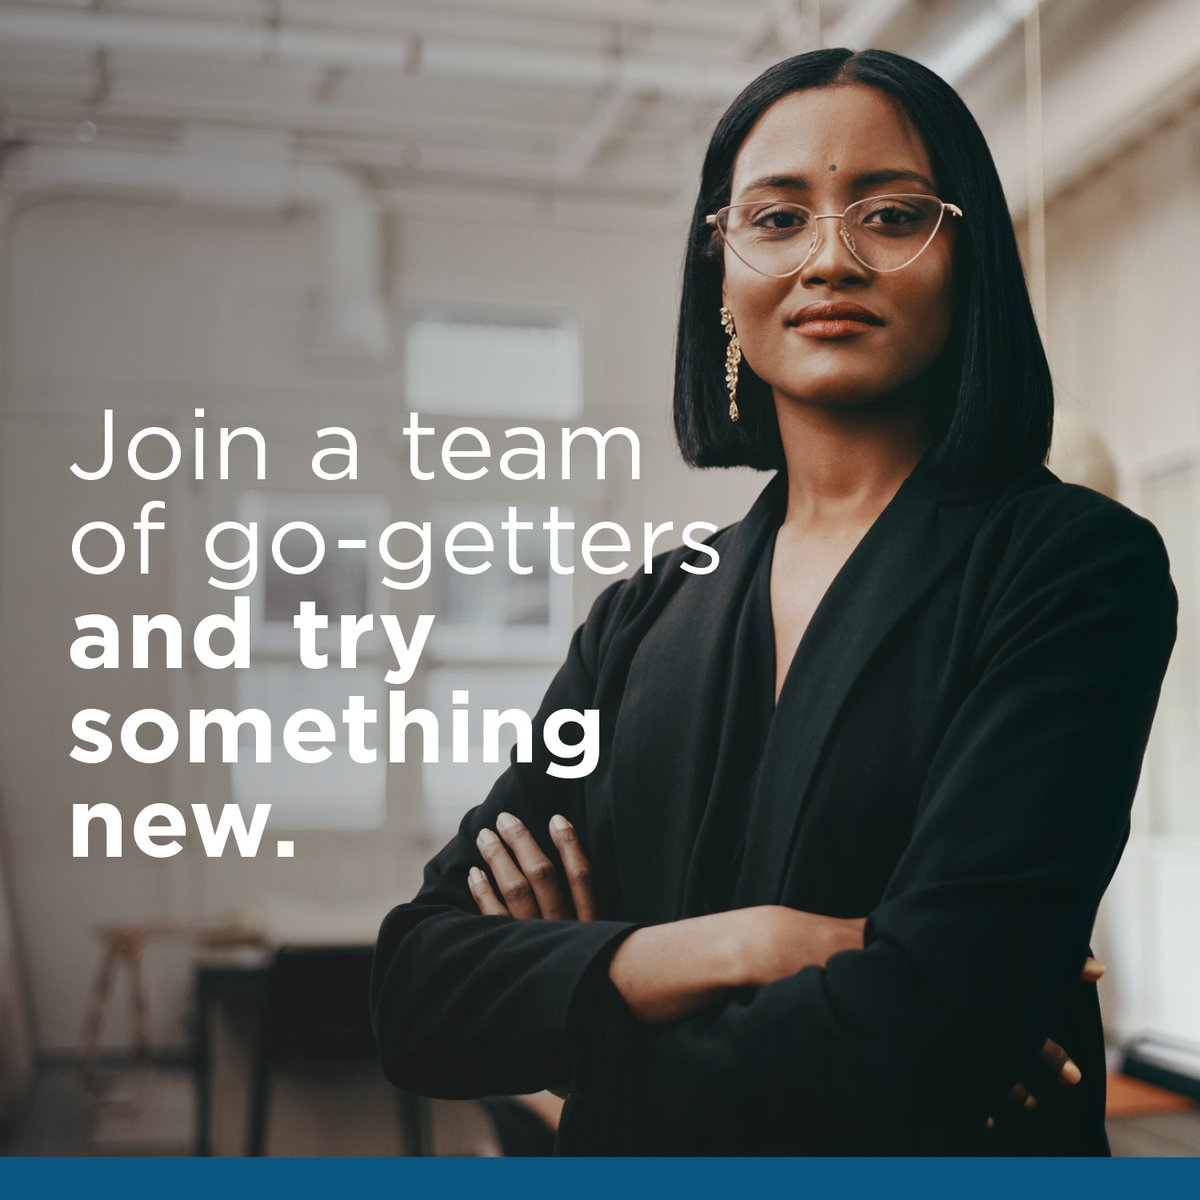 You can surround yourself with ambitious and driven people, and help families improve their financial well-being, by joining my Primerica team. Reach out to me to learn more.

Bit.ly/PriDisclosures